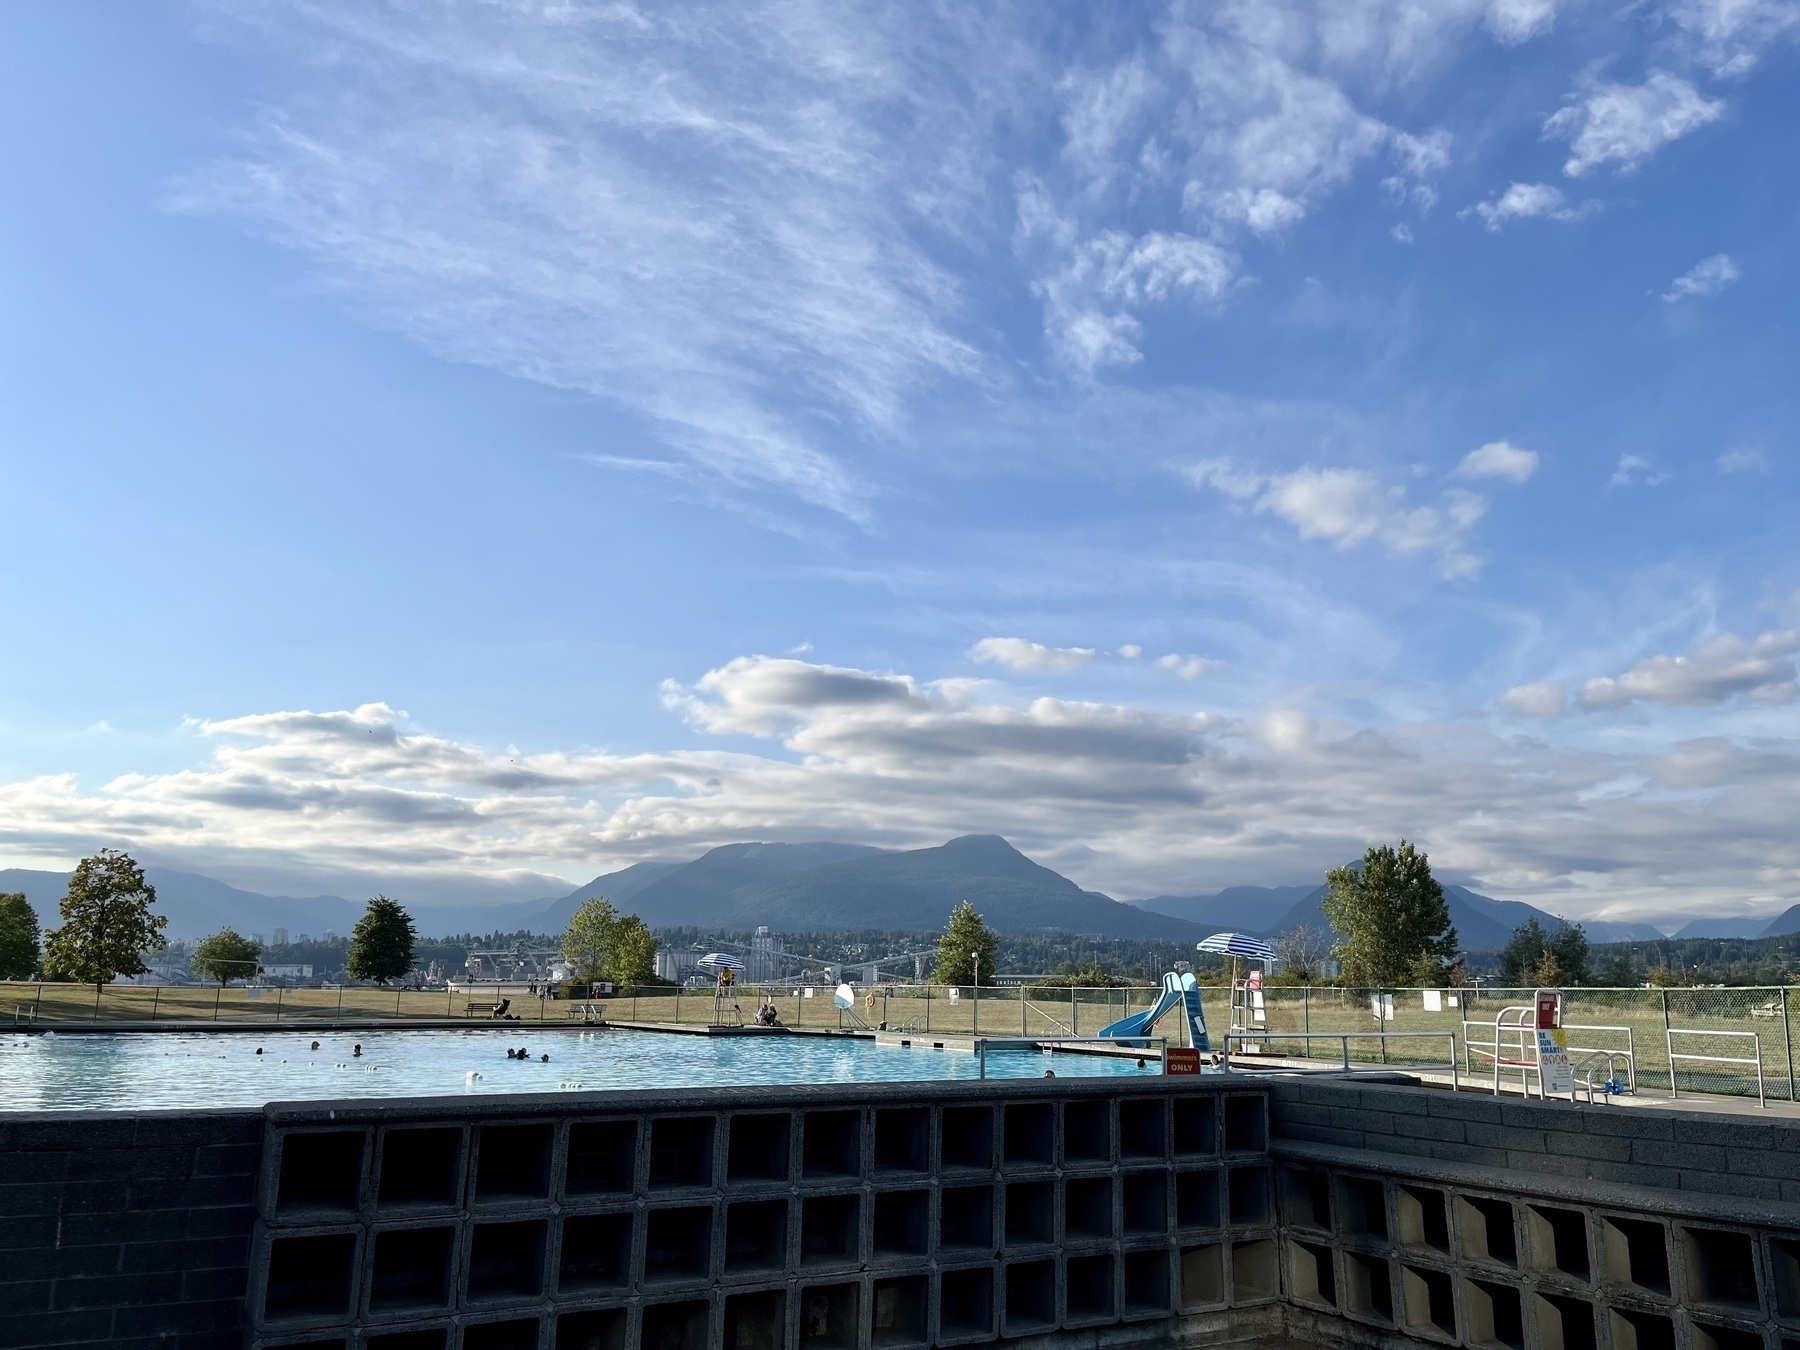 View from the change rooms over the pool and across to the North Shore mountains. Amazing blue skies with whispy clouds 